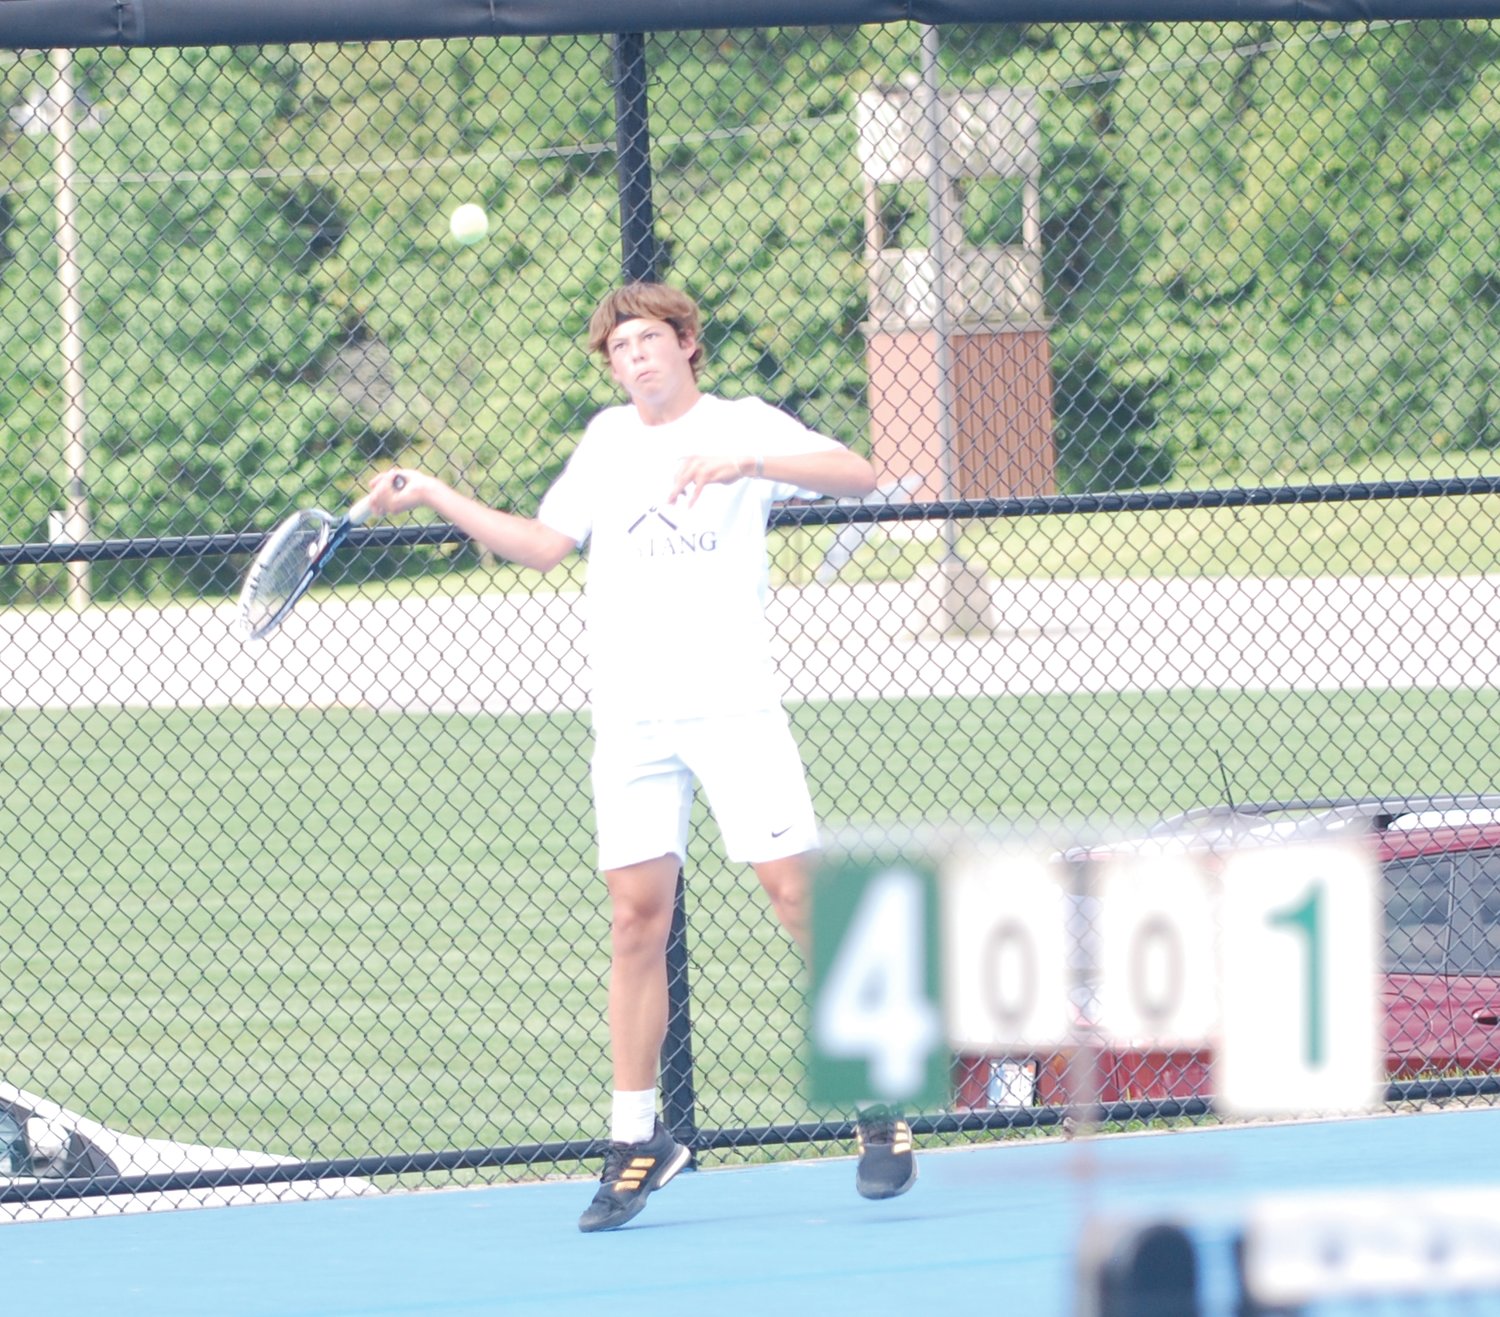 Fountain Central senior Cody Linville got a taste of victory at No. 1 singles by defeating Crawfordsville's Austin Motz 6-1, 7-5.